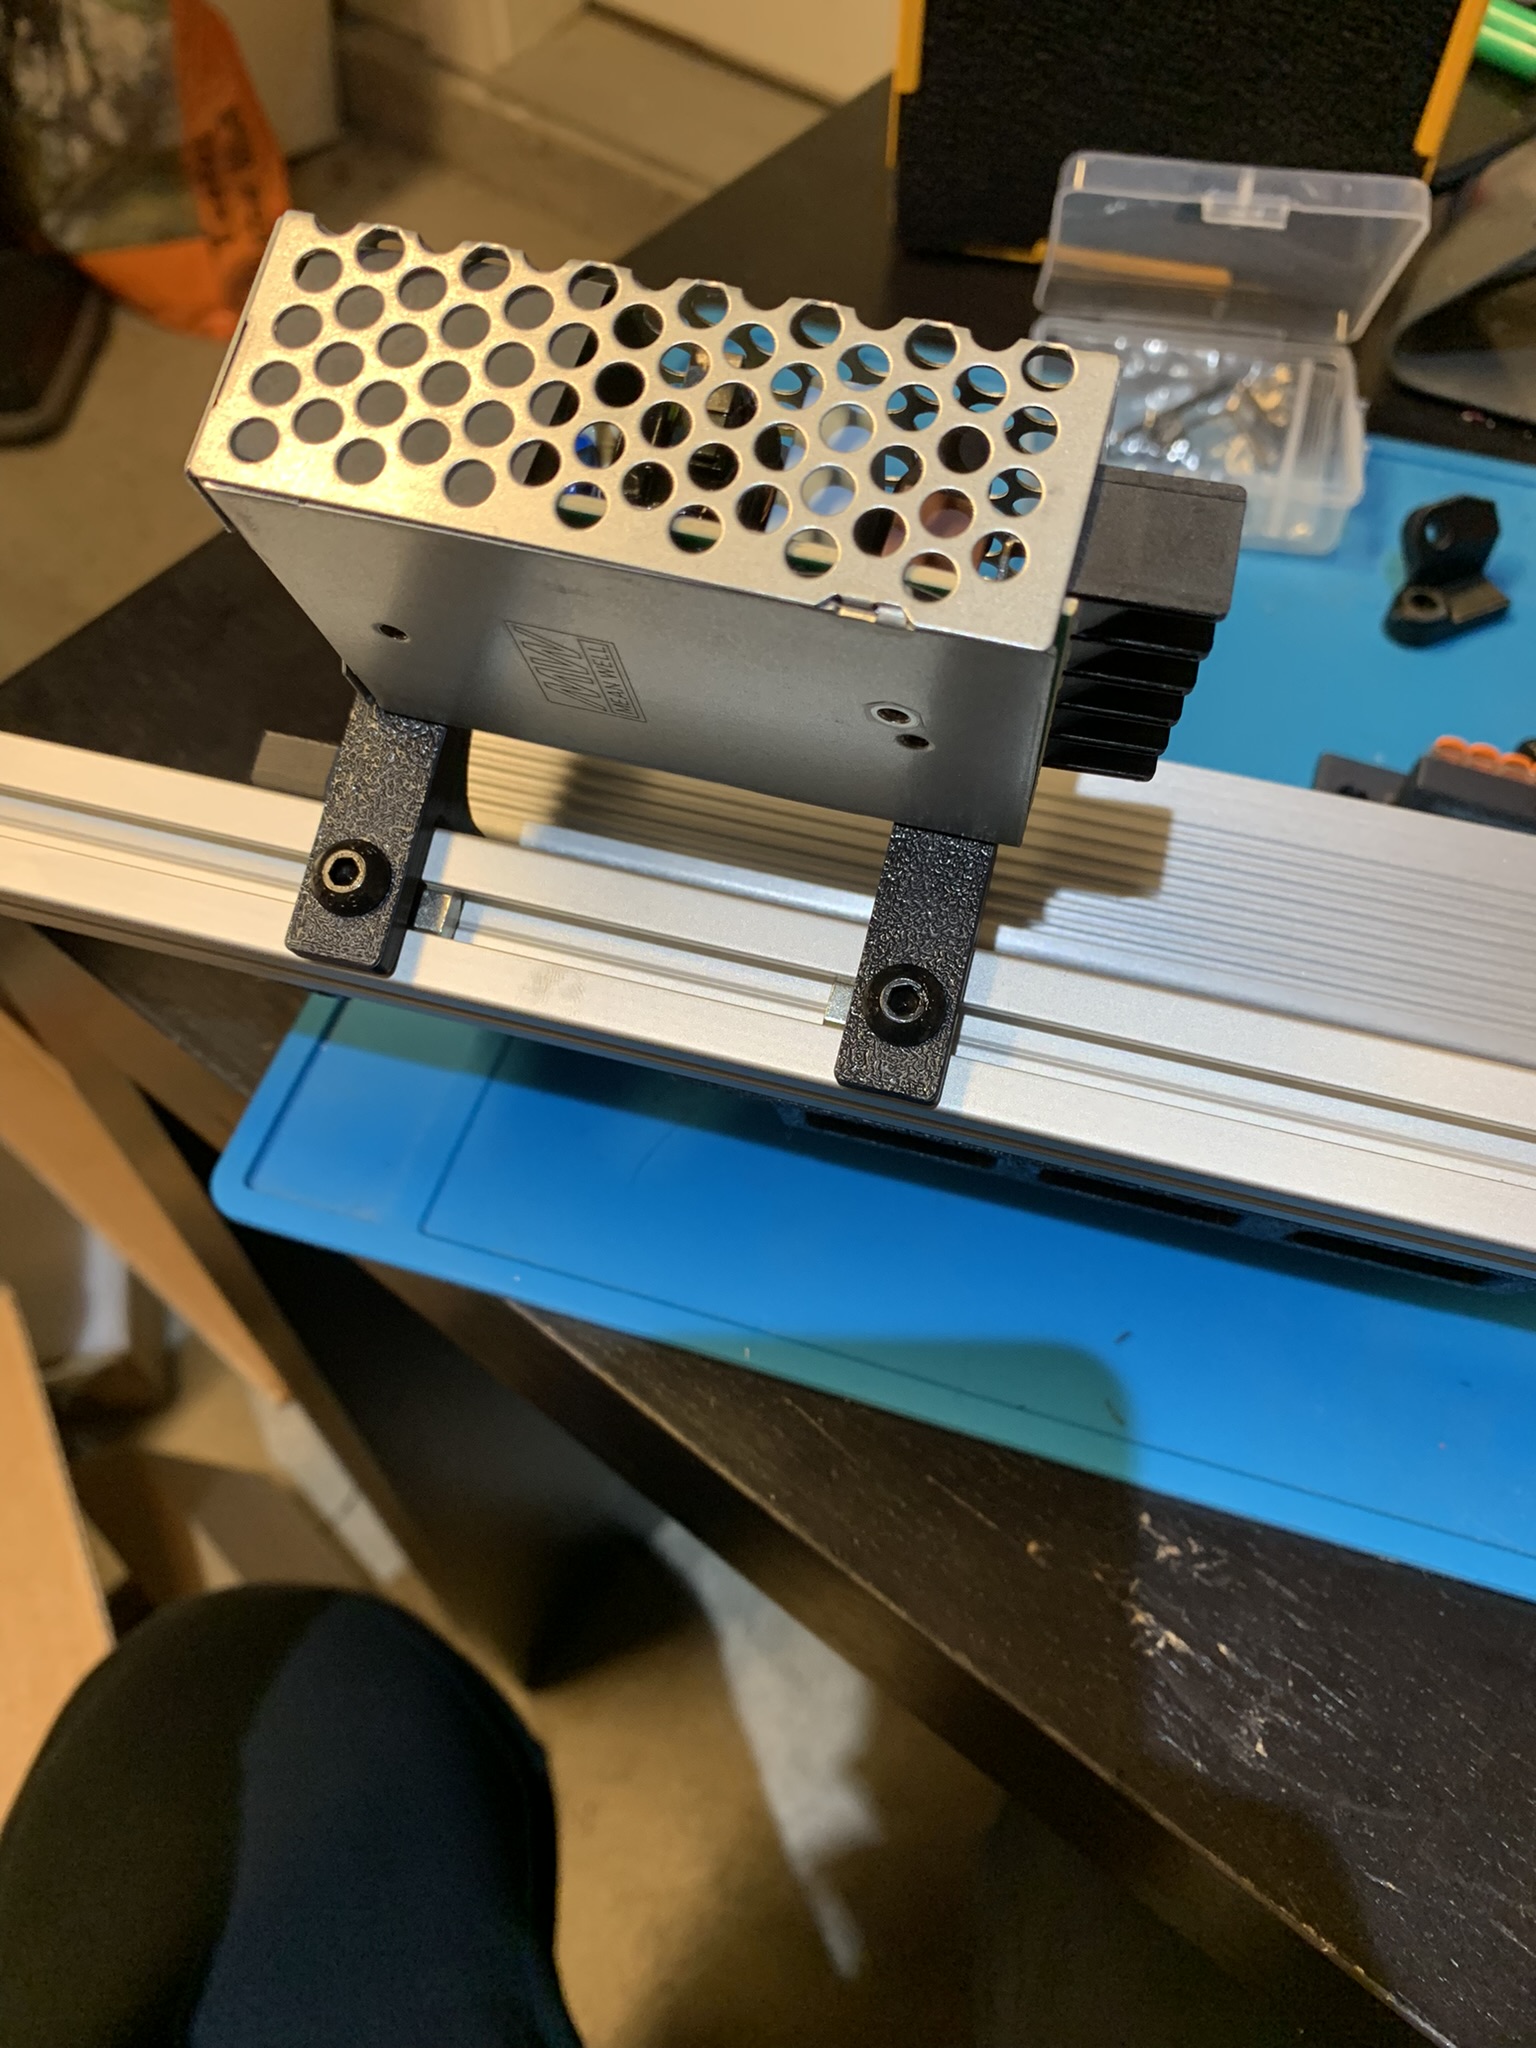 Mounts attached to the extrusion at the side